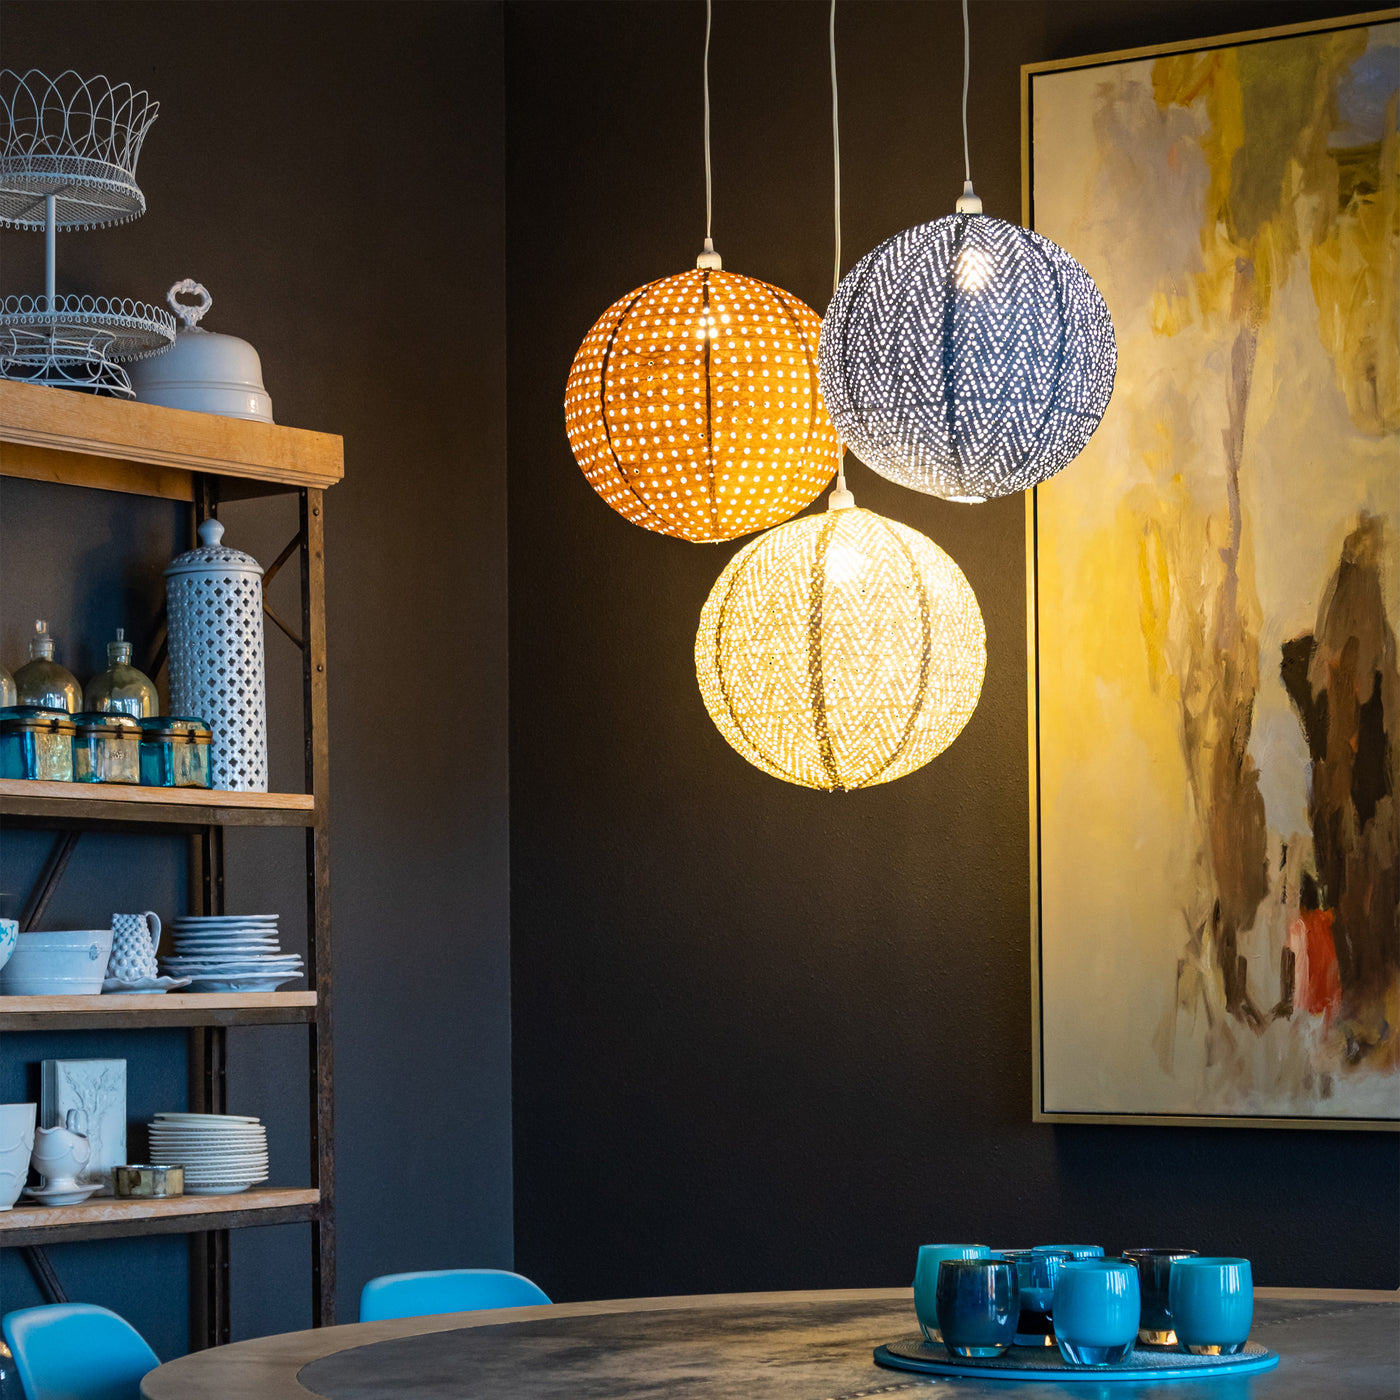 Group of three Stella Nova pendant lamps hanging over a dining table in front of a painting.